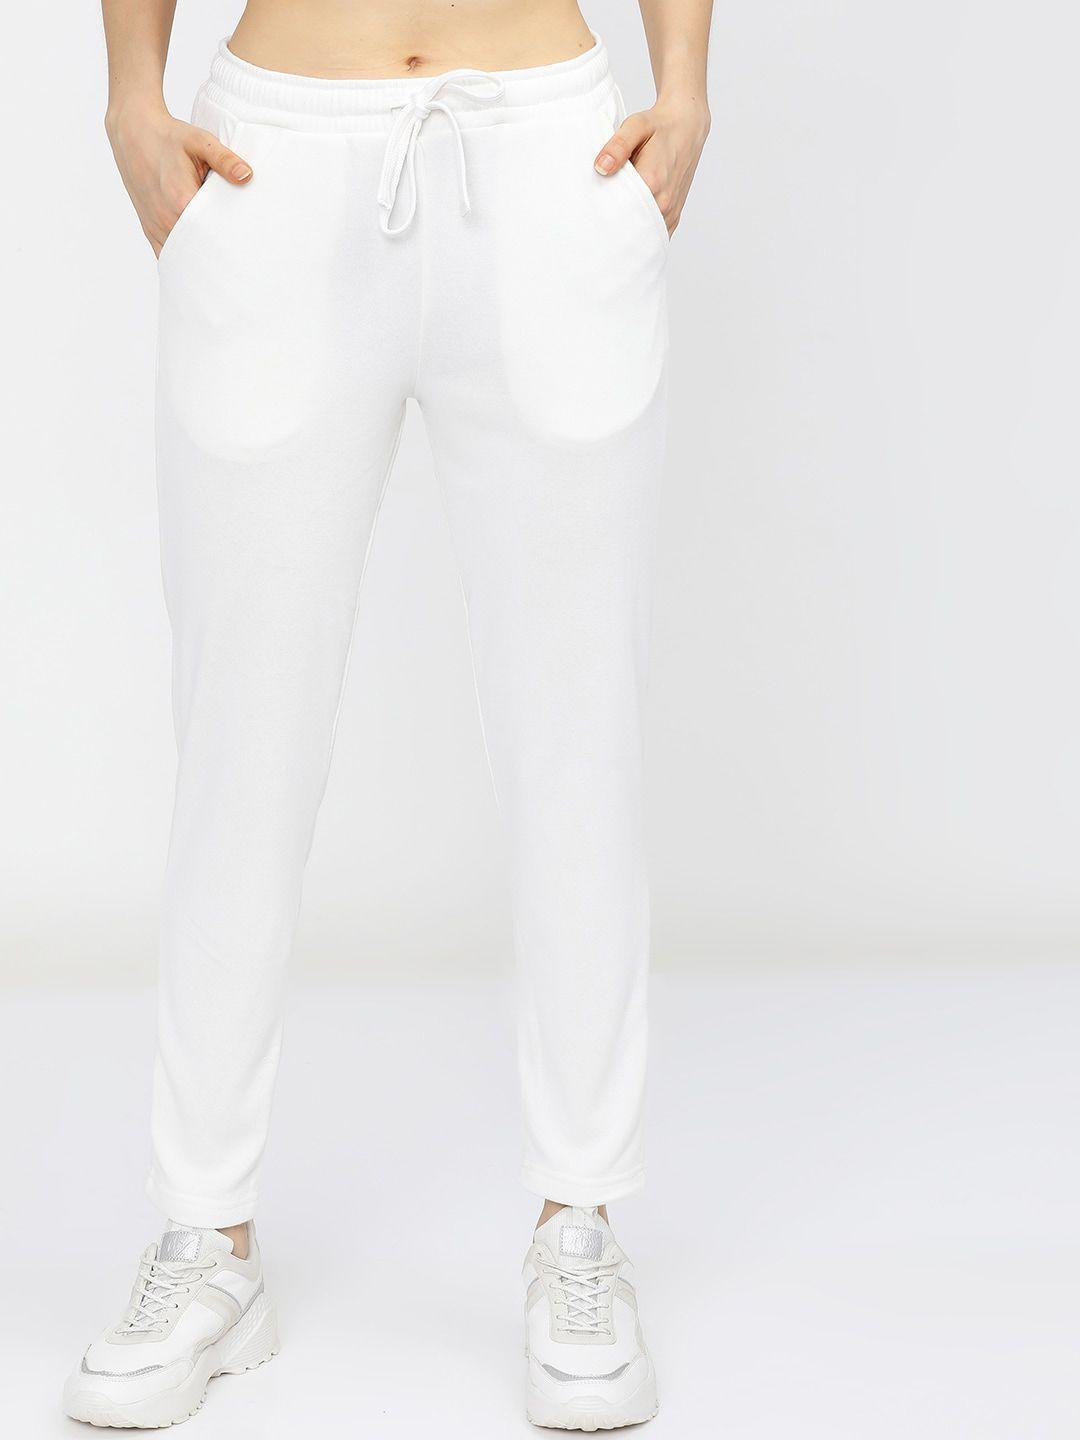 tokyo-talkies-women-white-solid-casual-track-pants